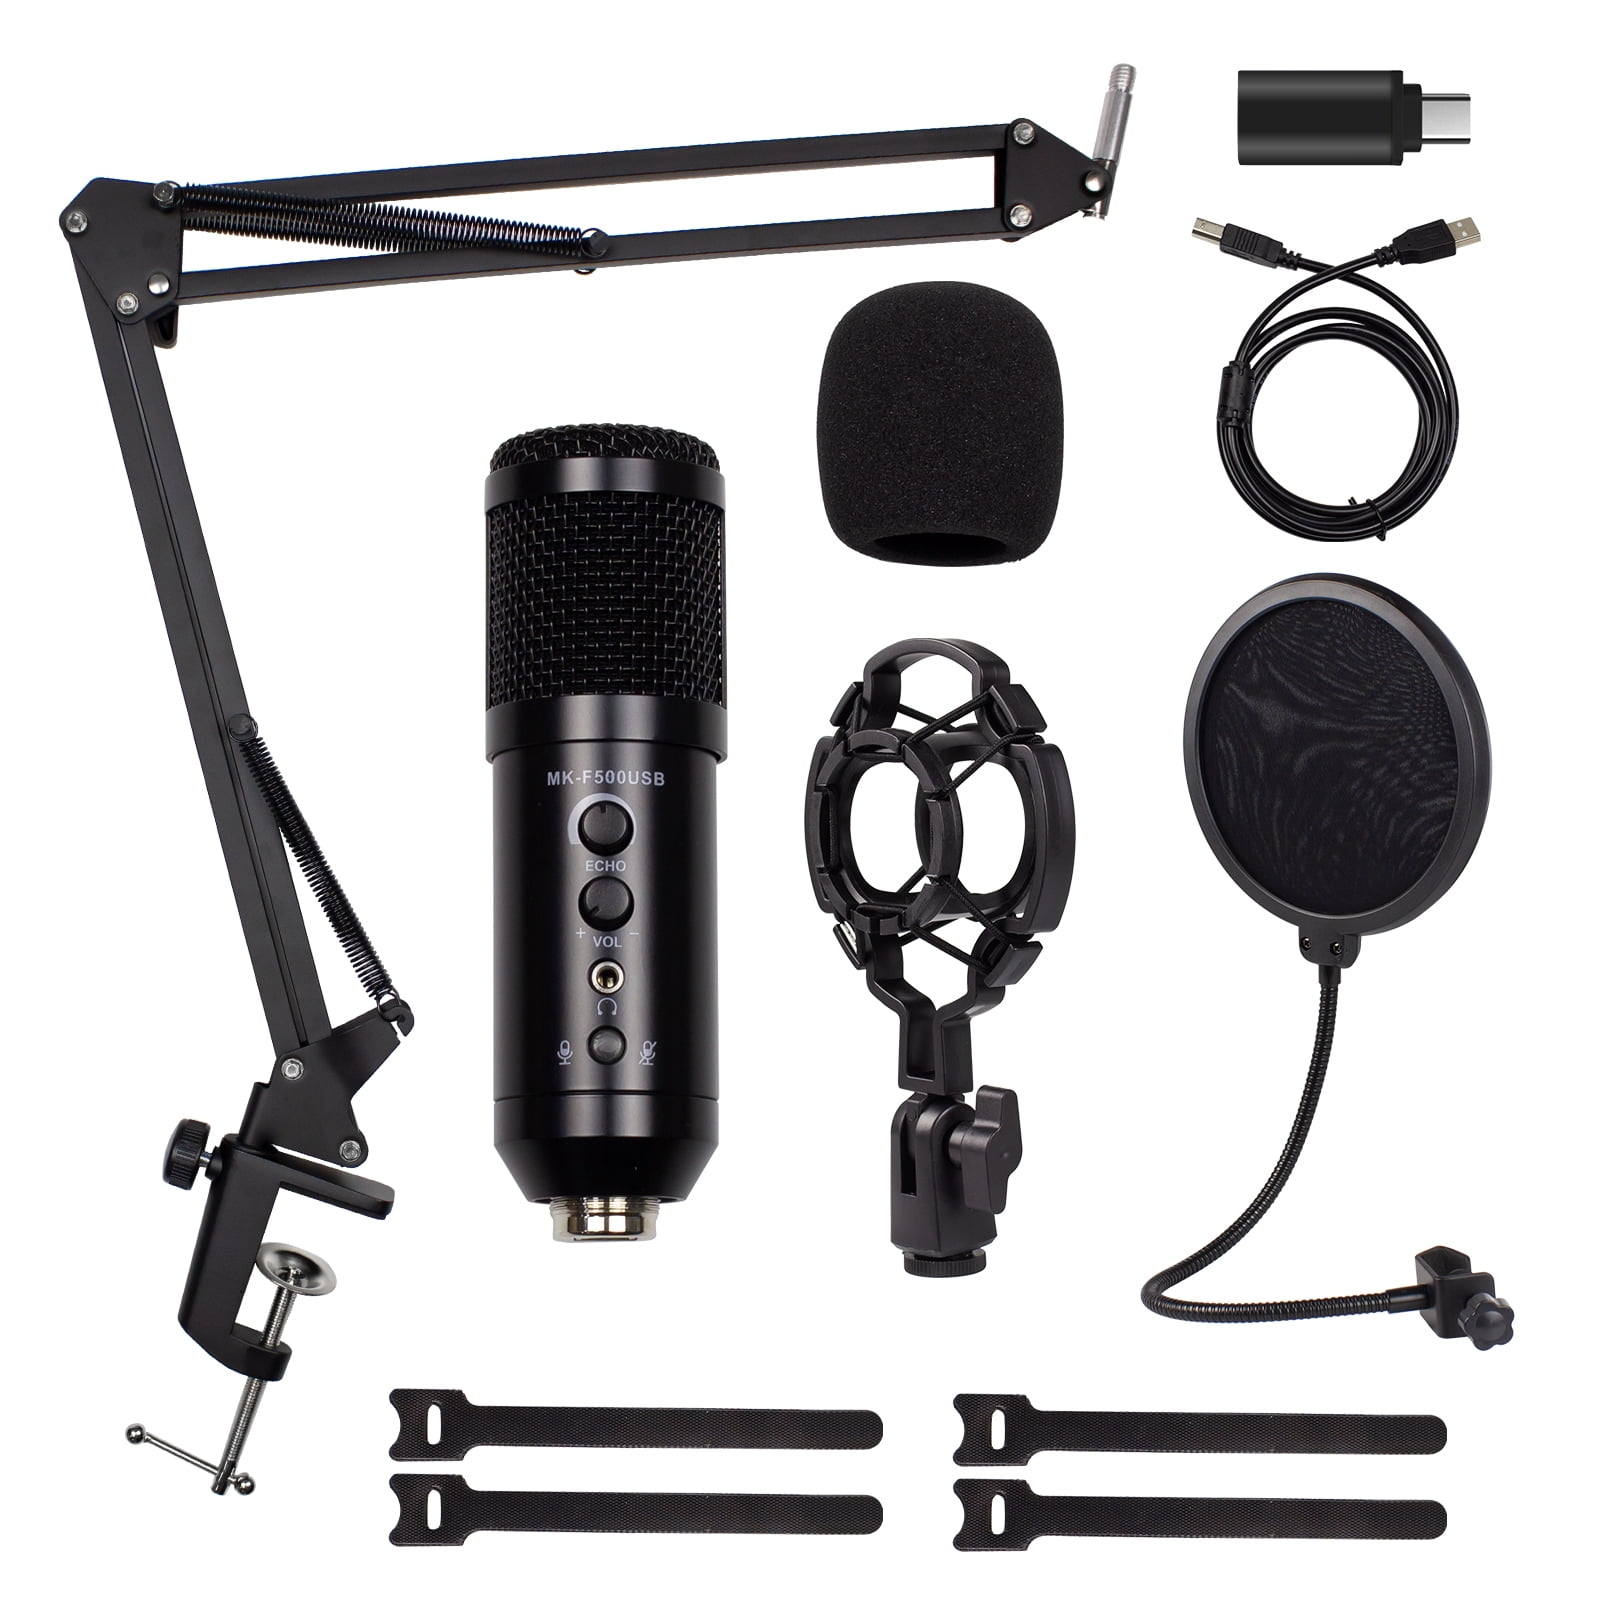 USB Podcast Microphone Kit Cardioid Condenser Studio PC Microphone with Boom Arm for Recording Singing YouTube Vocal Cardioid PC Microphone Bundle for Mac Windows Xbox 